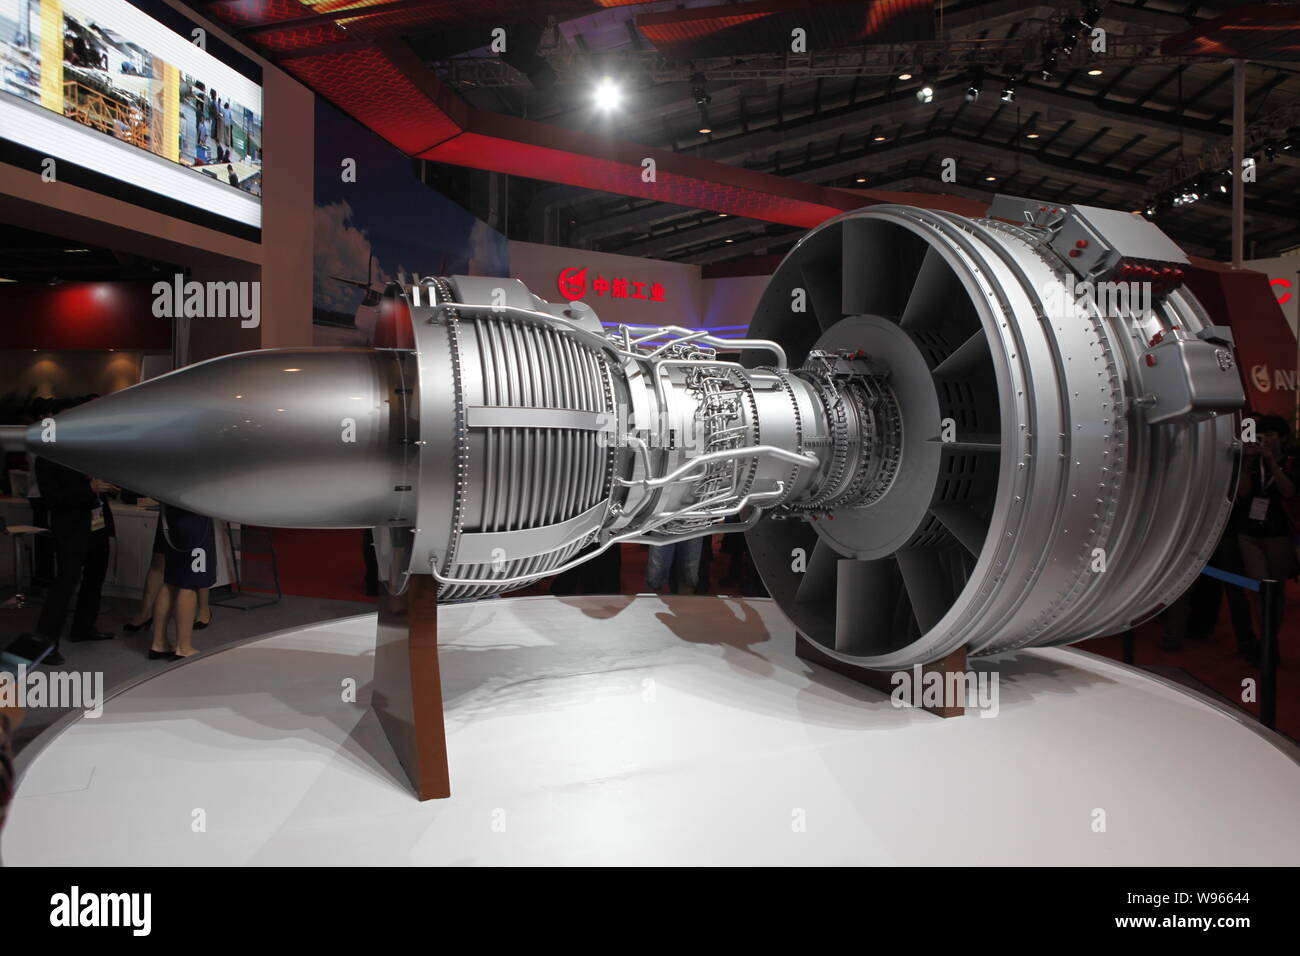 A model of the CJ-1000A high-bypass-ratio turbofan engine is displayed at the stand of AVIC (Aviation Industry Corporation of China) during the 9th Ch Stock Photo